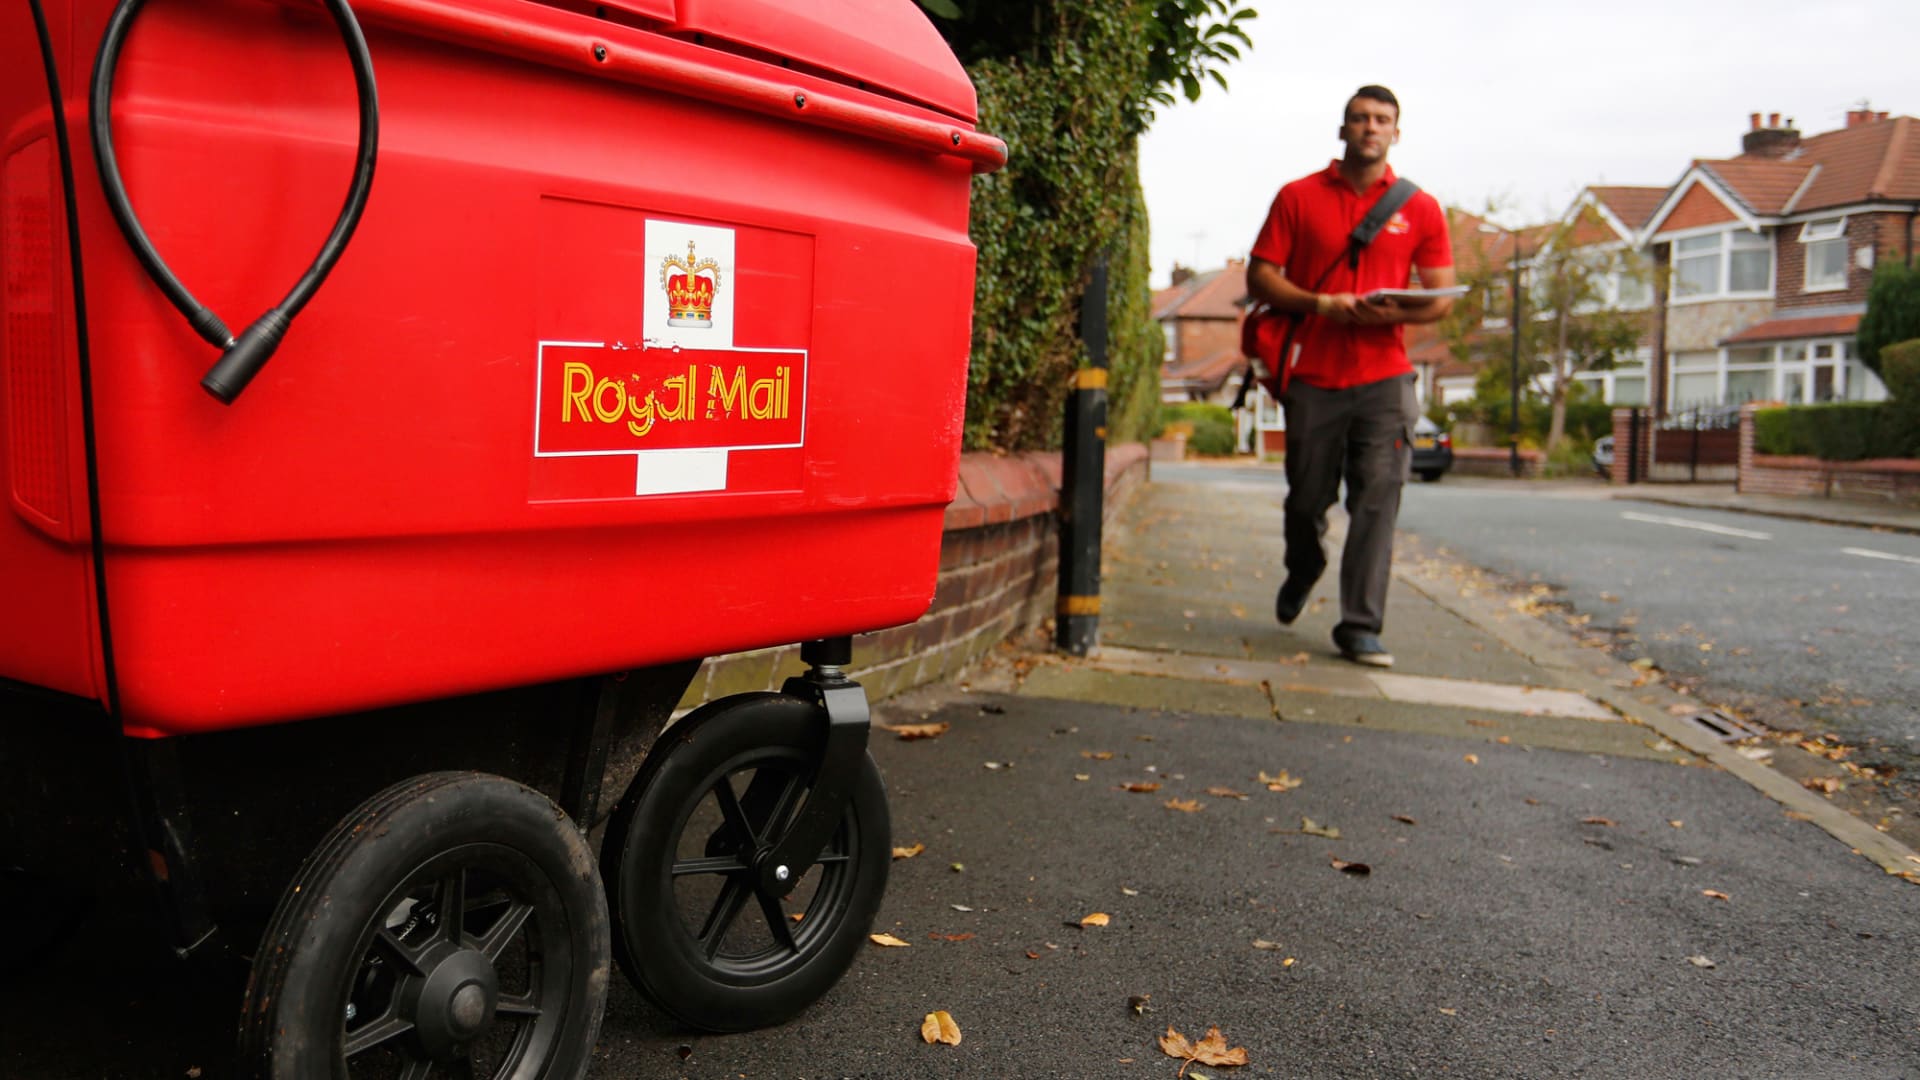 UK's Royal Mail reveals plans to cut up to 6,000 jobs by next summer